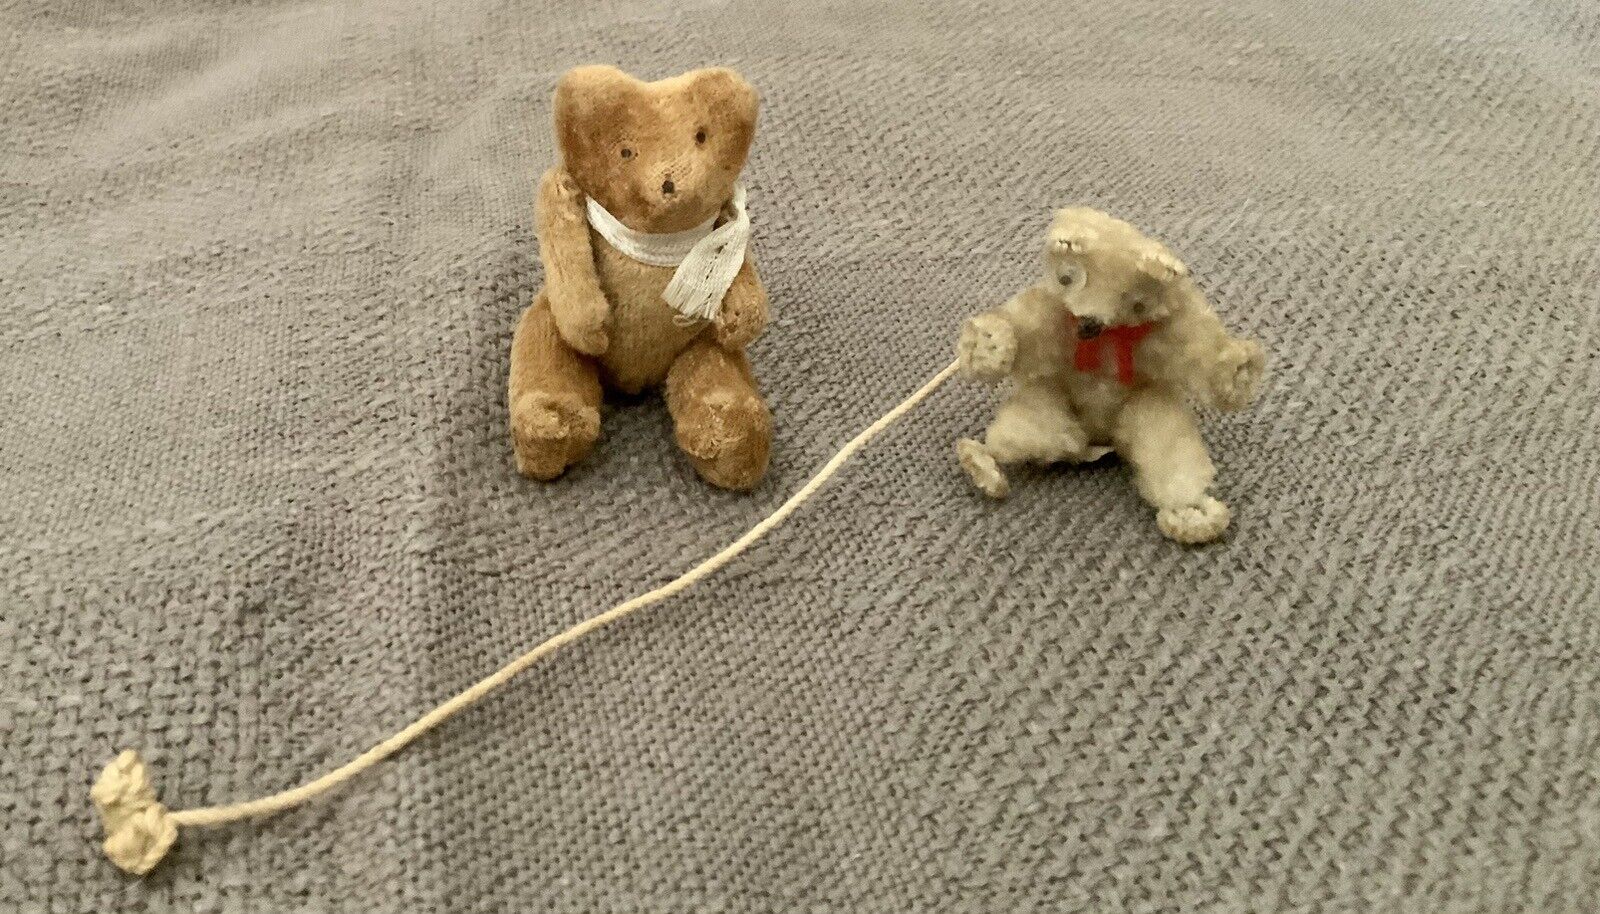 Vintage 2 Miniature Teddy Bears One With Glass EyesJAPAN Labels 1950’s Dollhouse